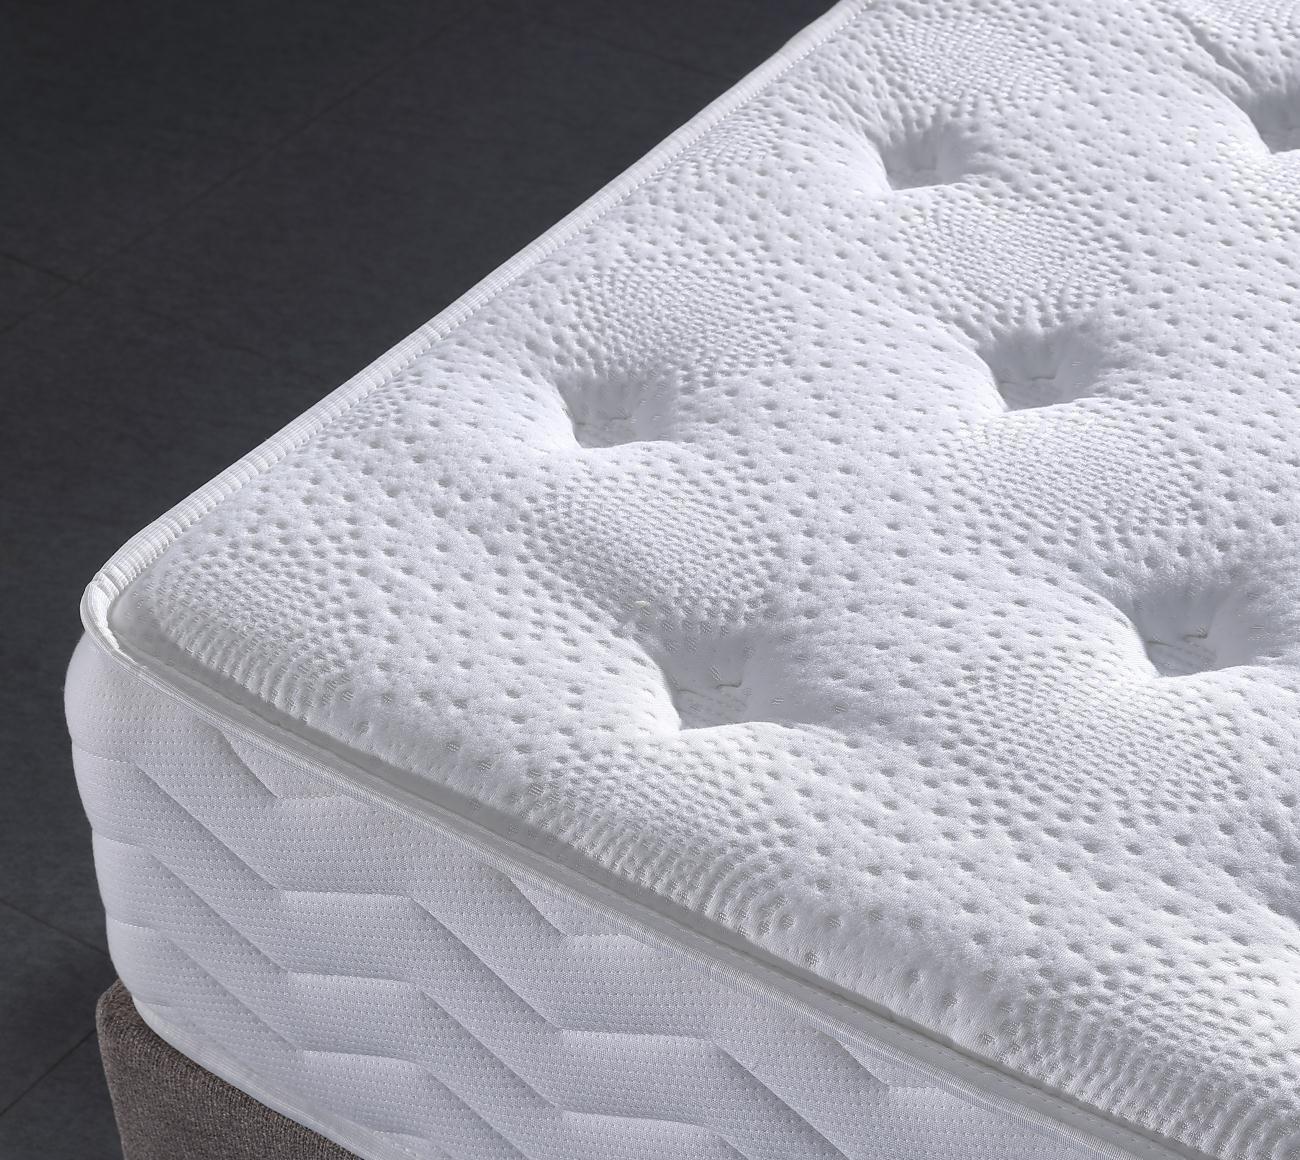 Fansace 21BA-02 Hotel Full-Size Mattress With Tight Top Design Compressed